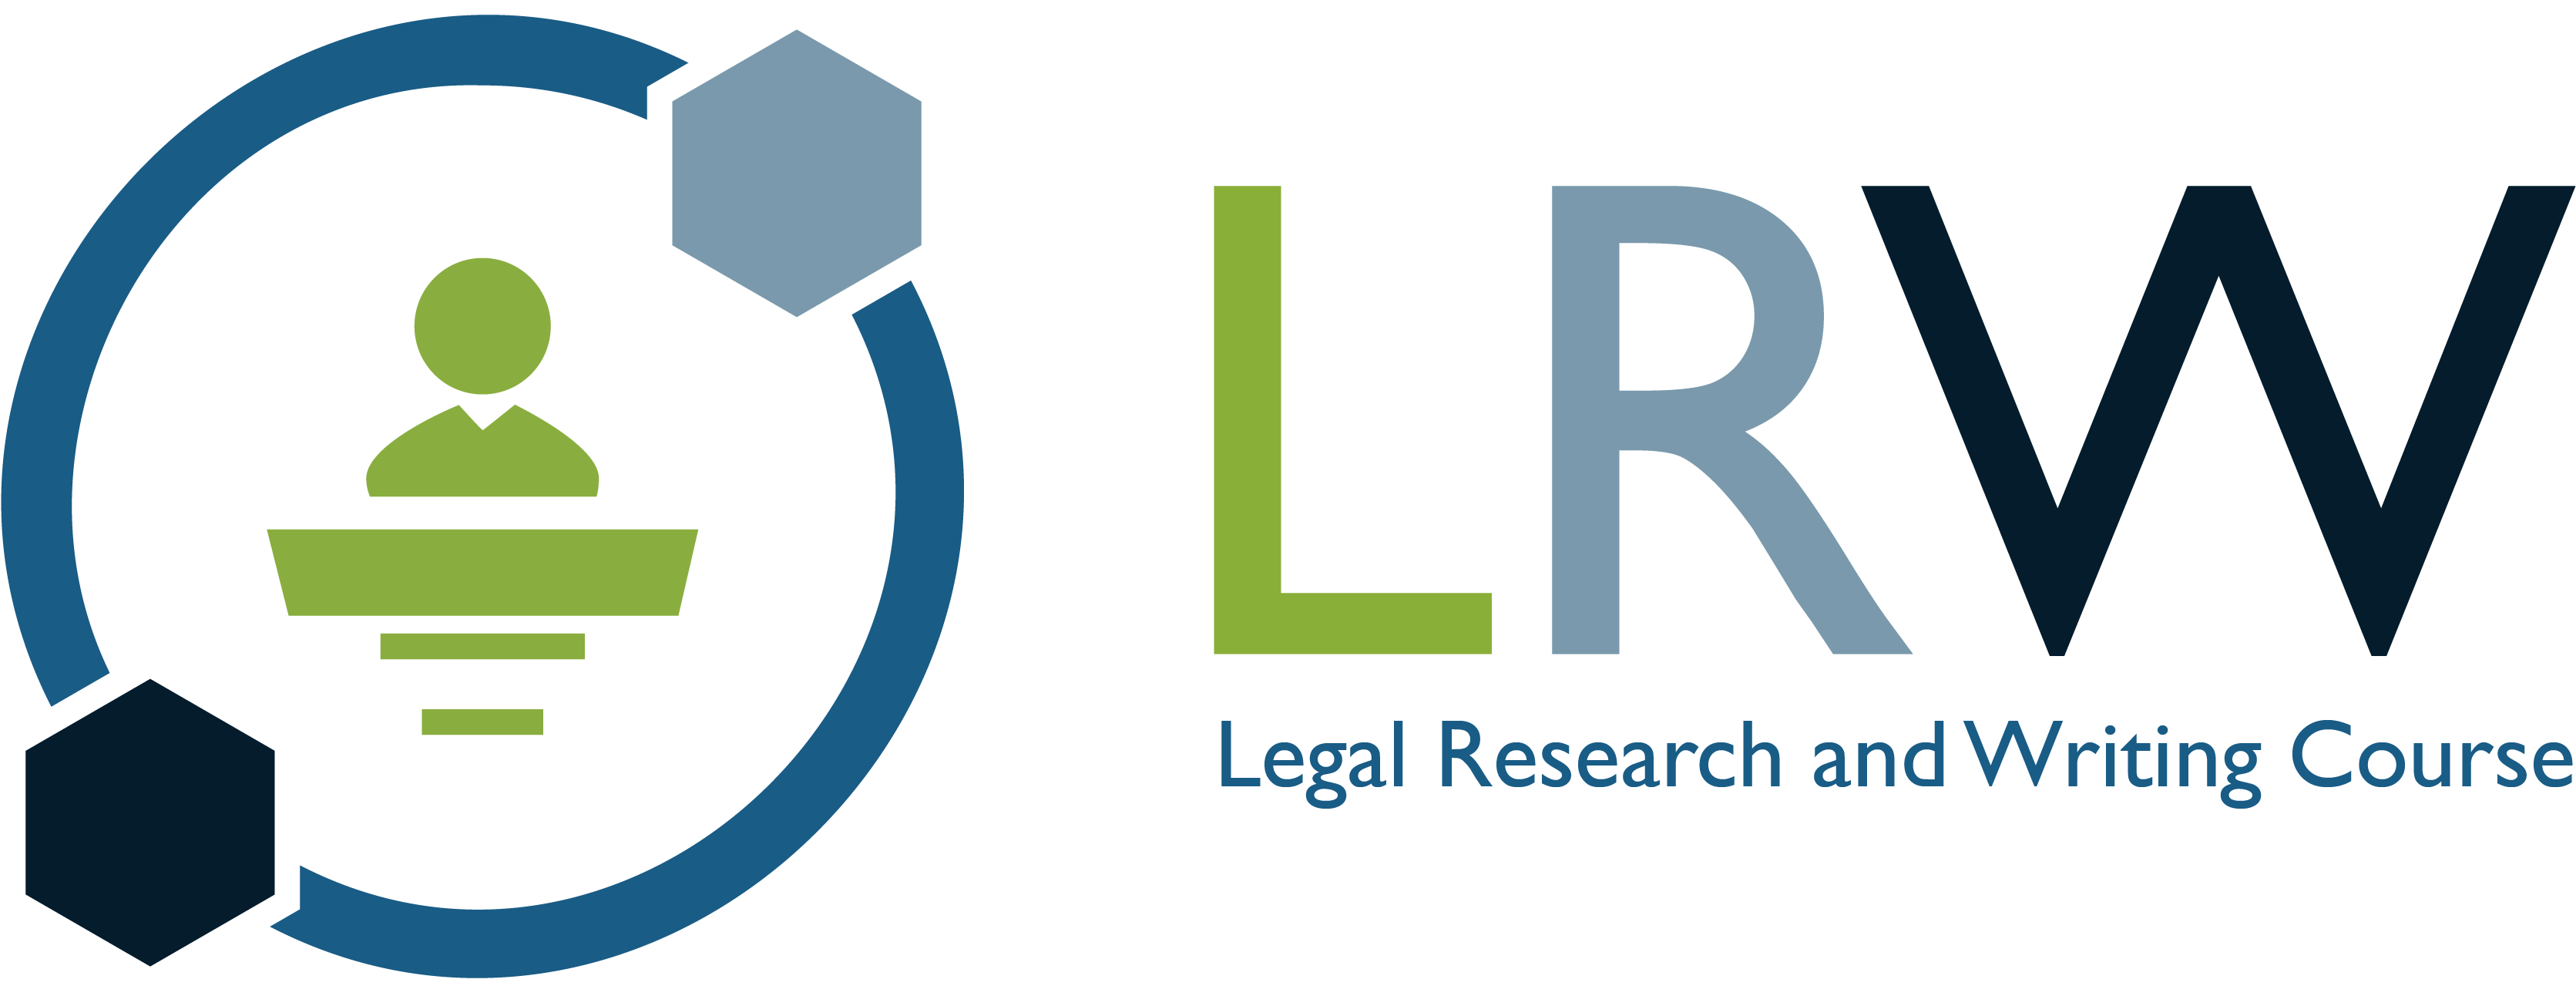 nca approved course in legal research and writing